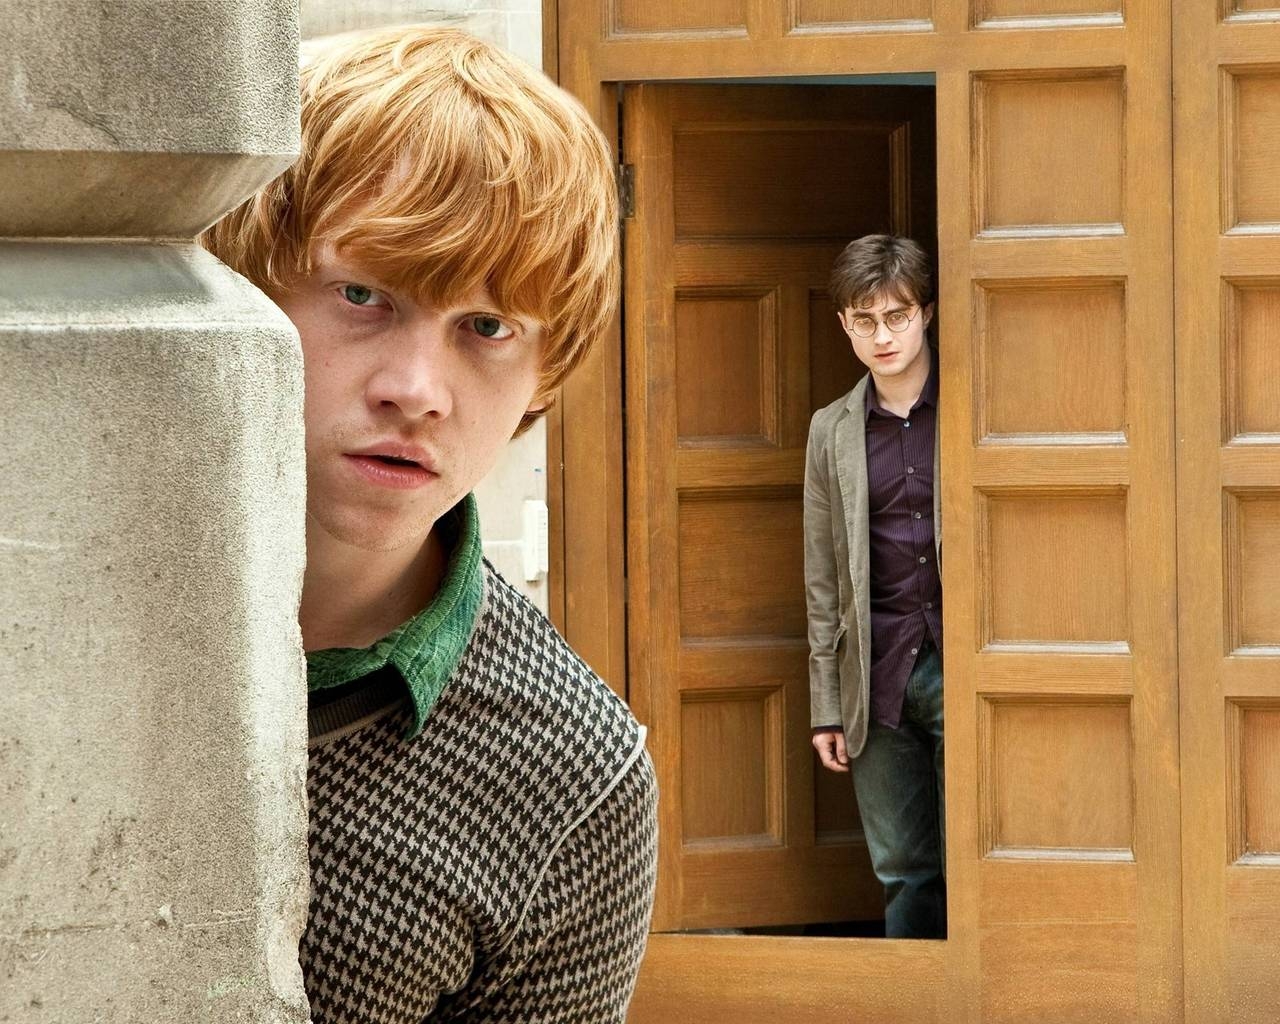 Daniel Radcliffe and Rupert Grint for 1280 x 1024 resolution